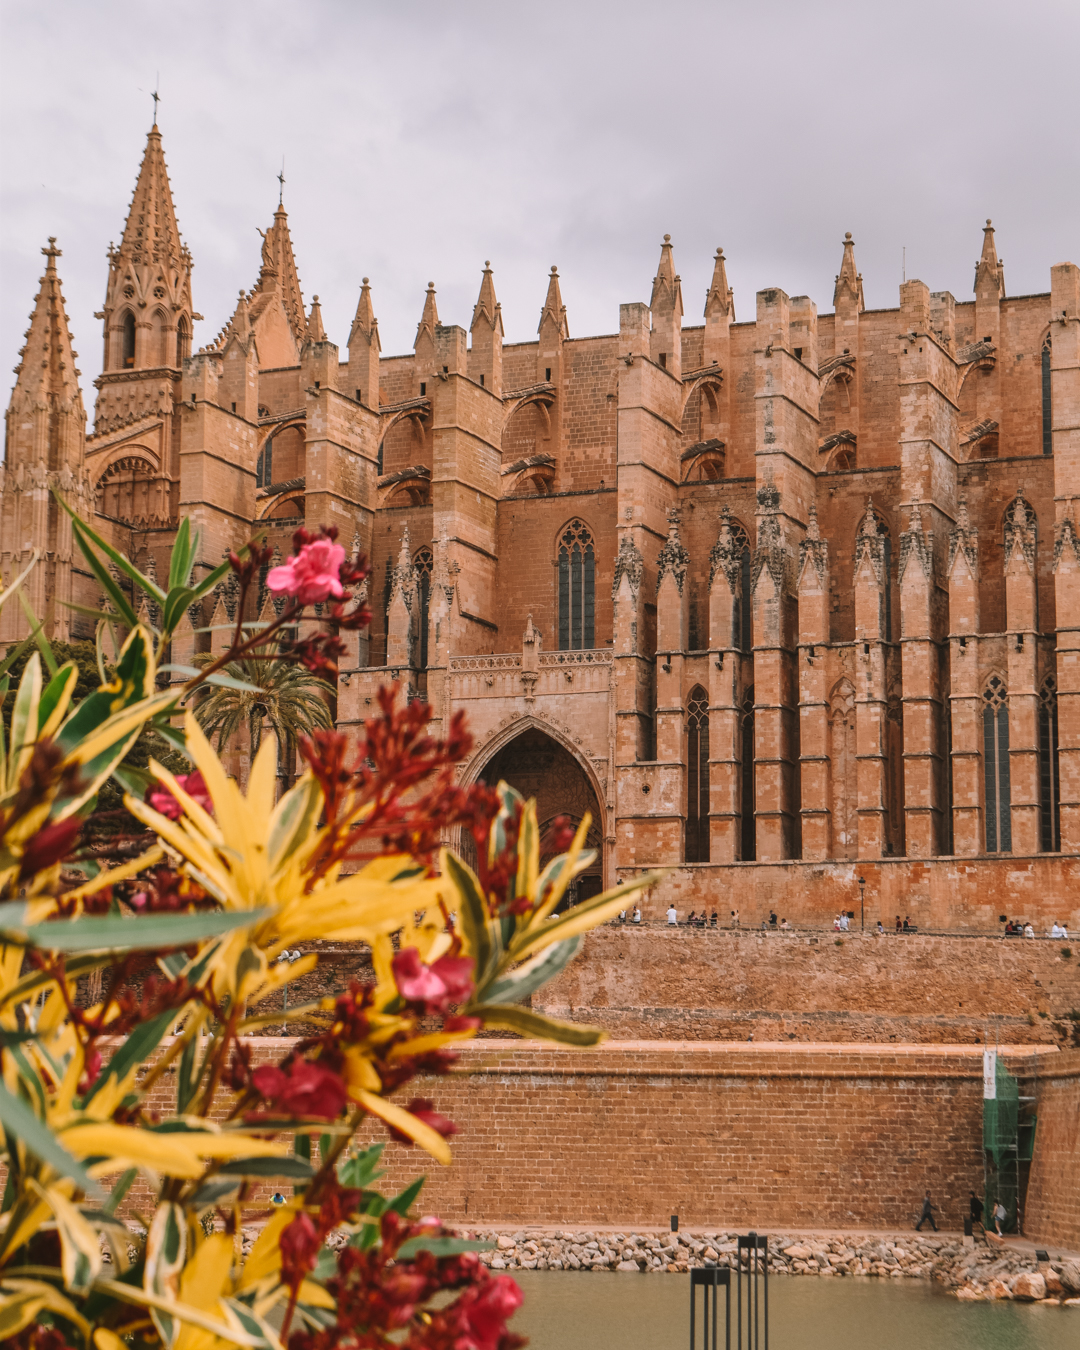 Visit The Palma de Mallorca Cathedral - one of the top things to do in Palma